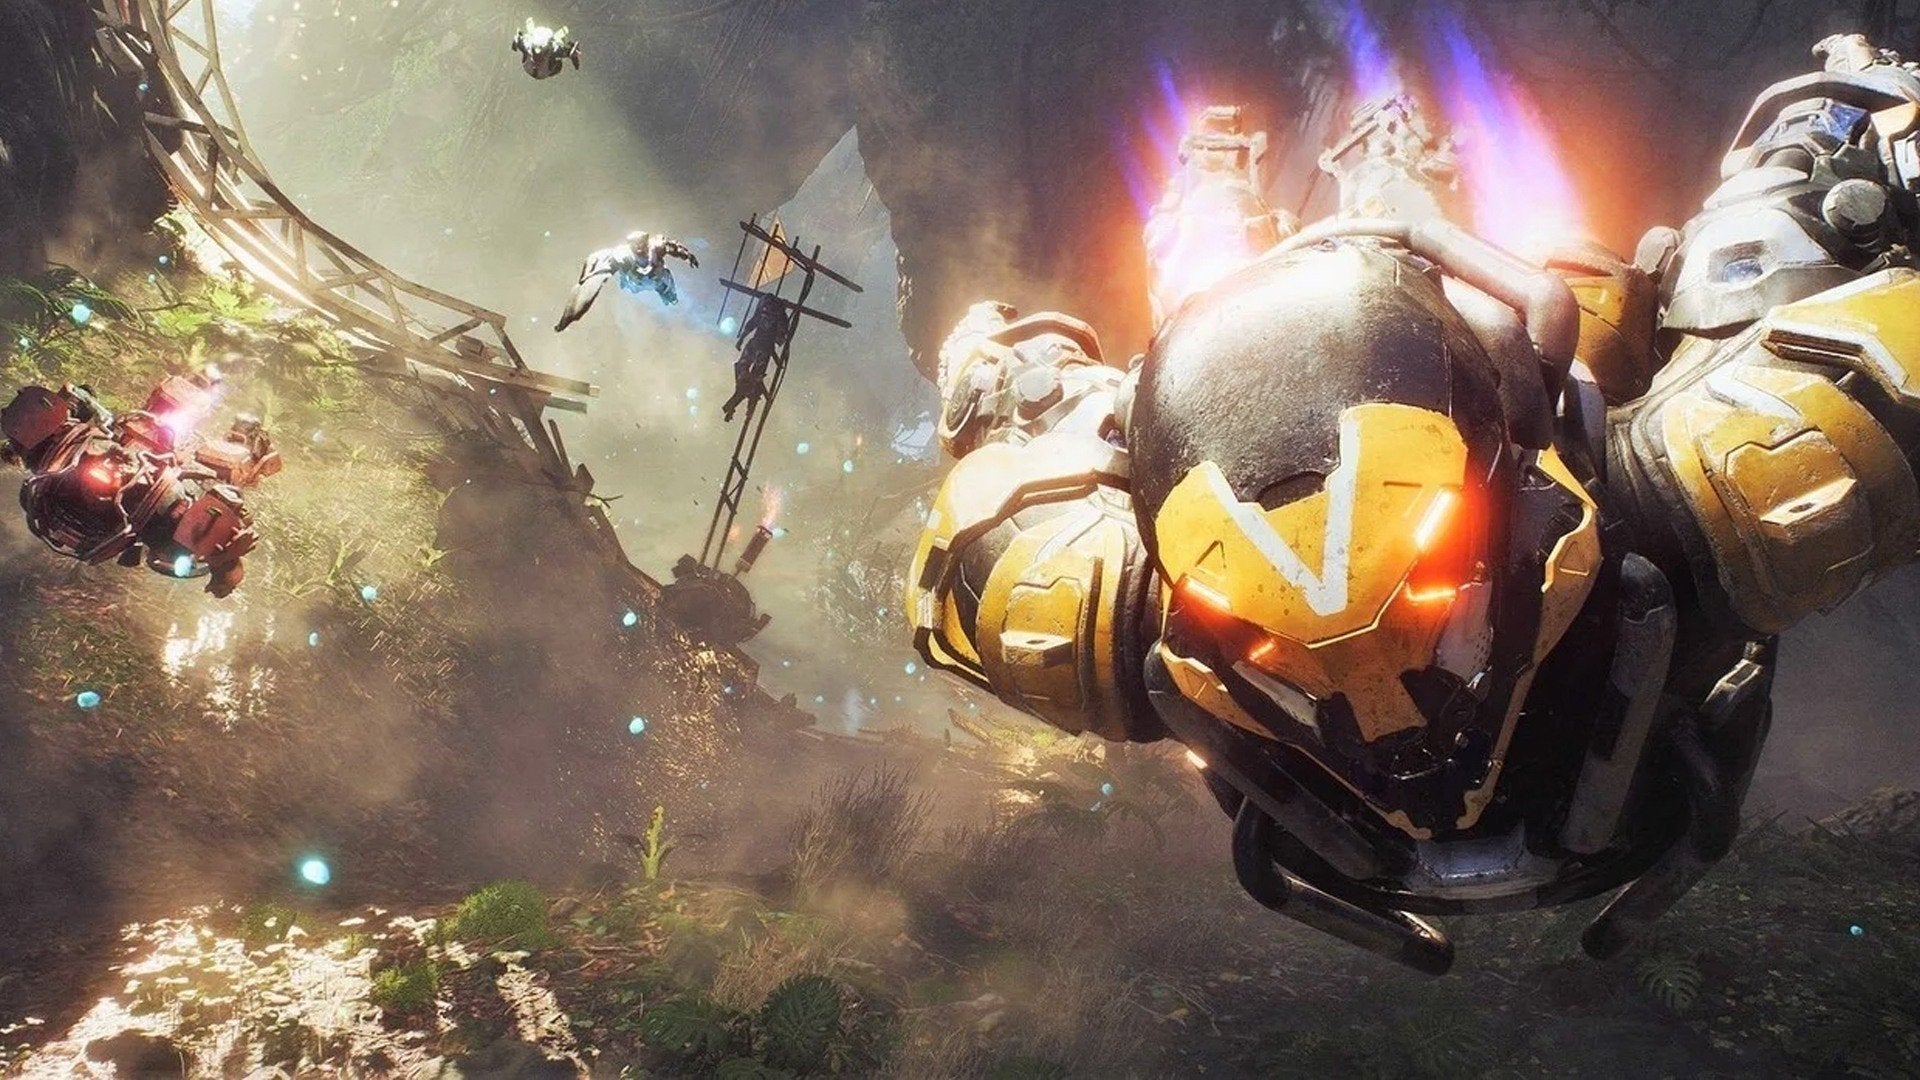 Image for BioWare's Anthem rework could get cancelled by EA this week - report